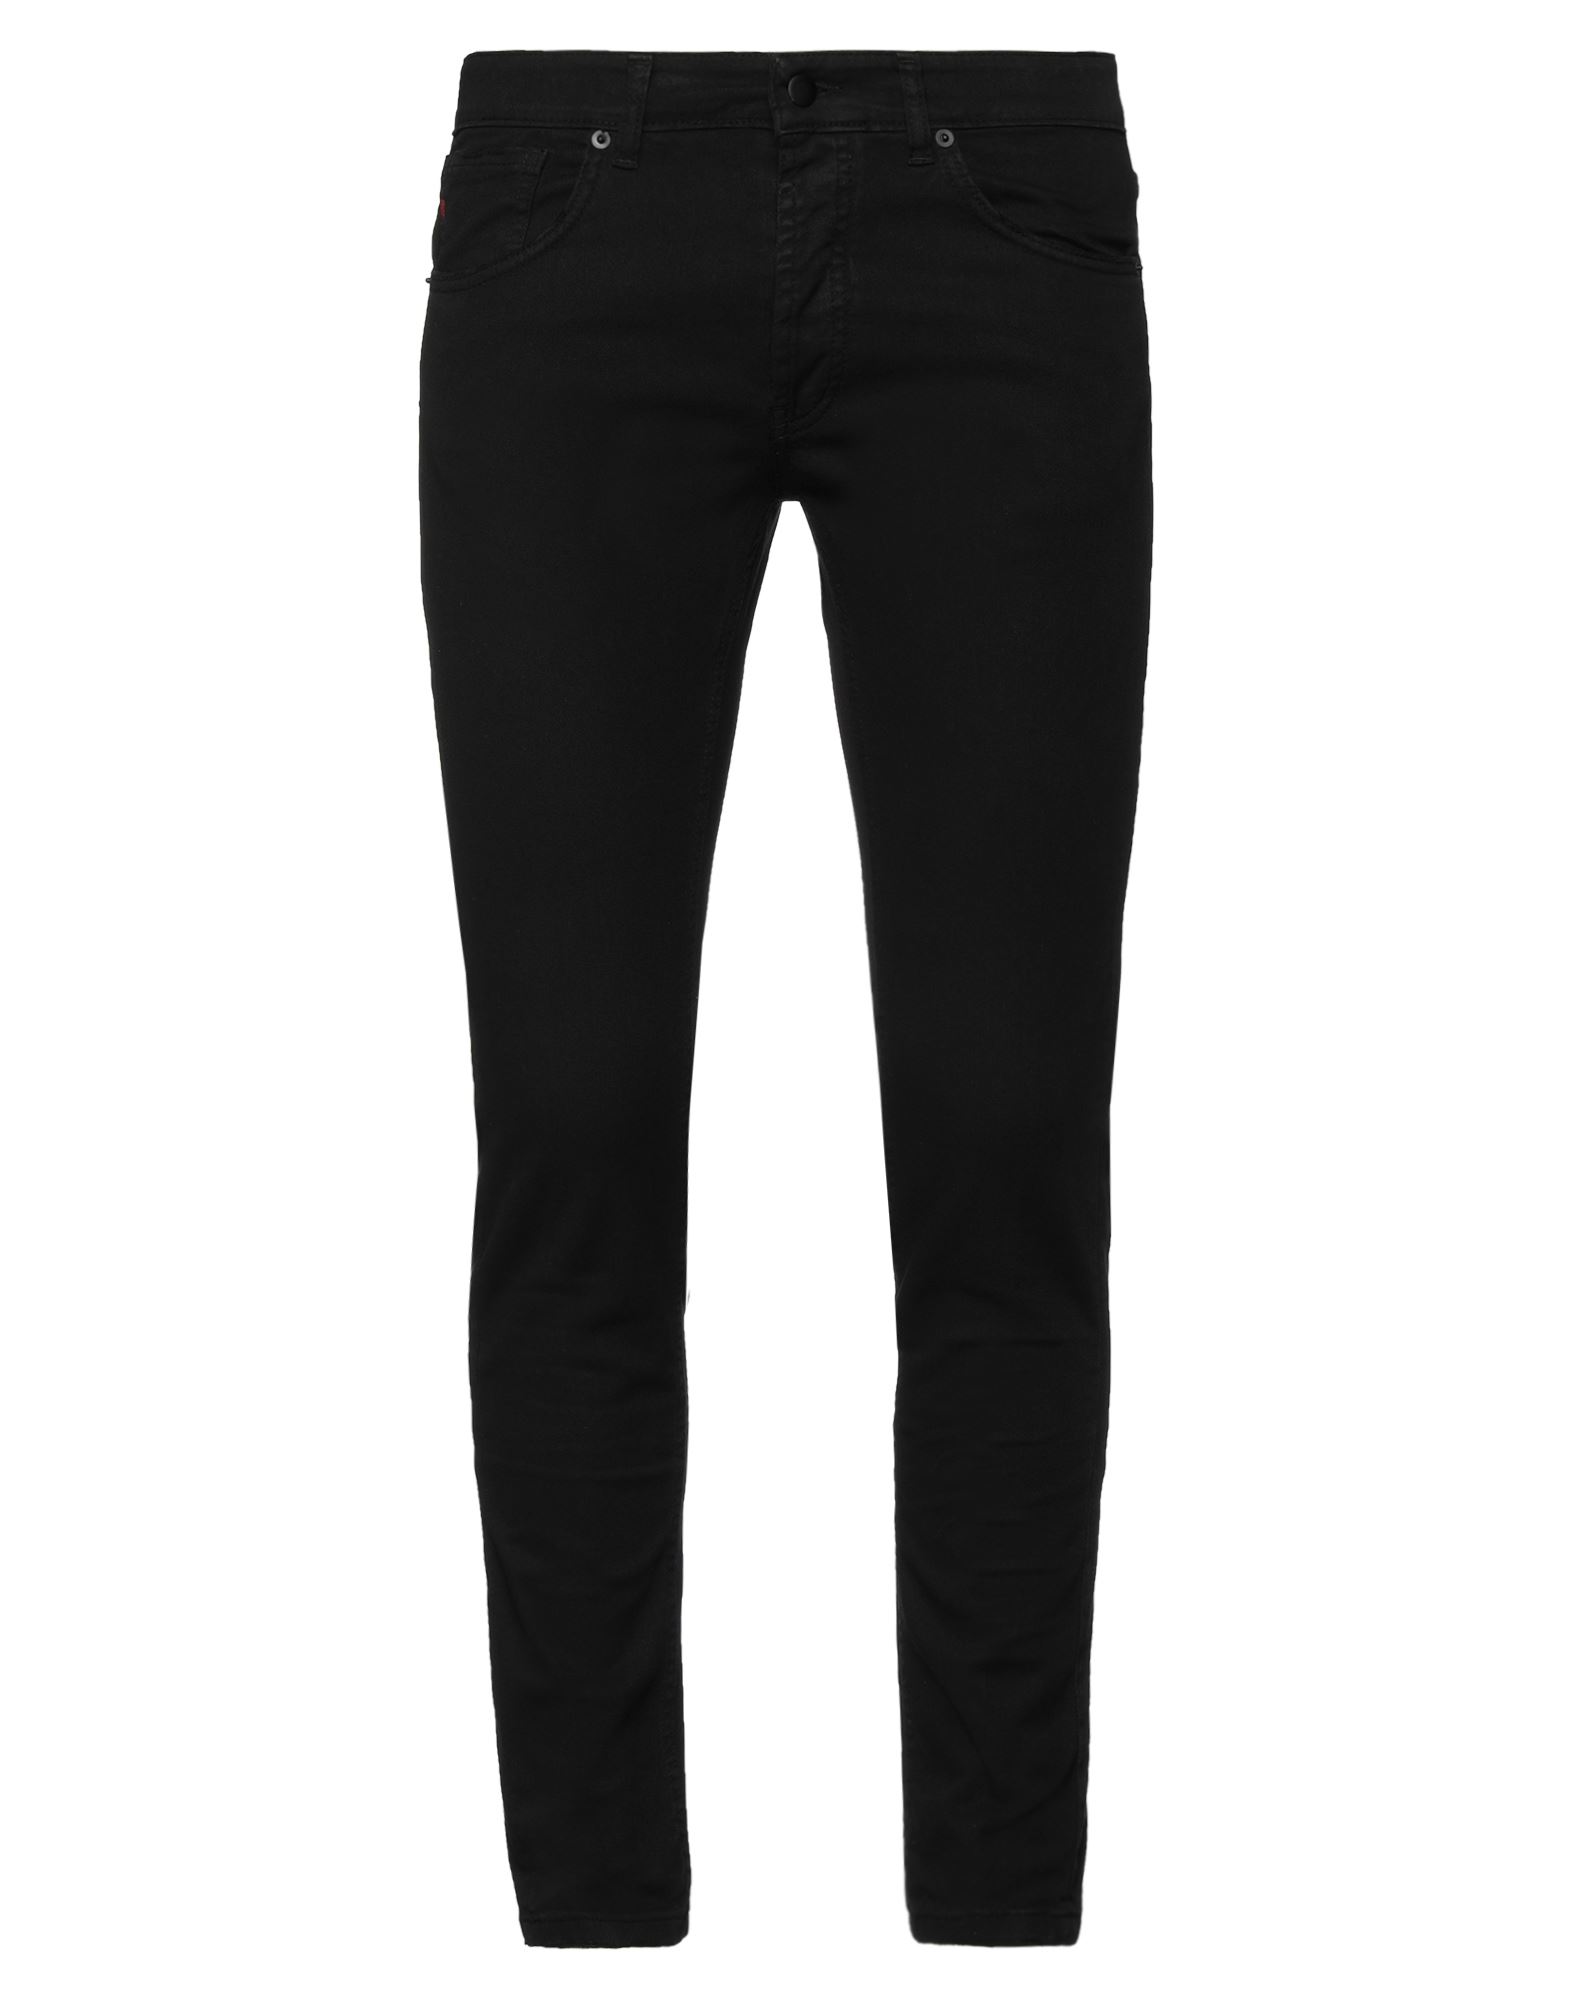 Addiction Italian Couture Pants In Black